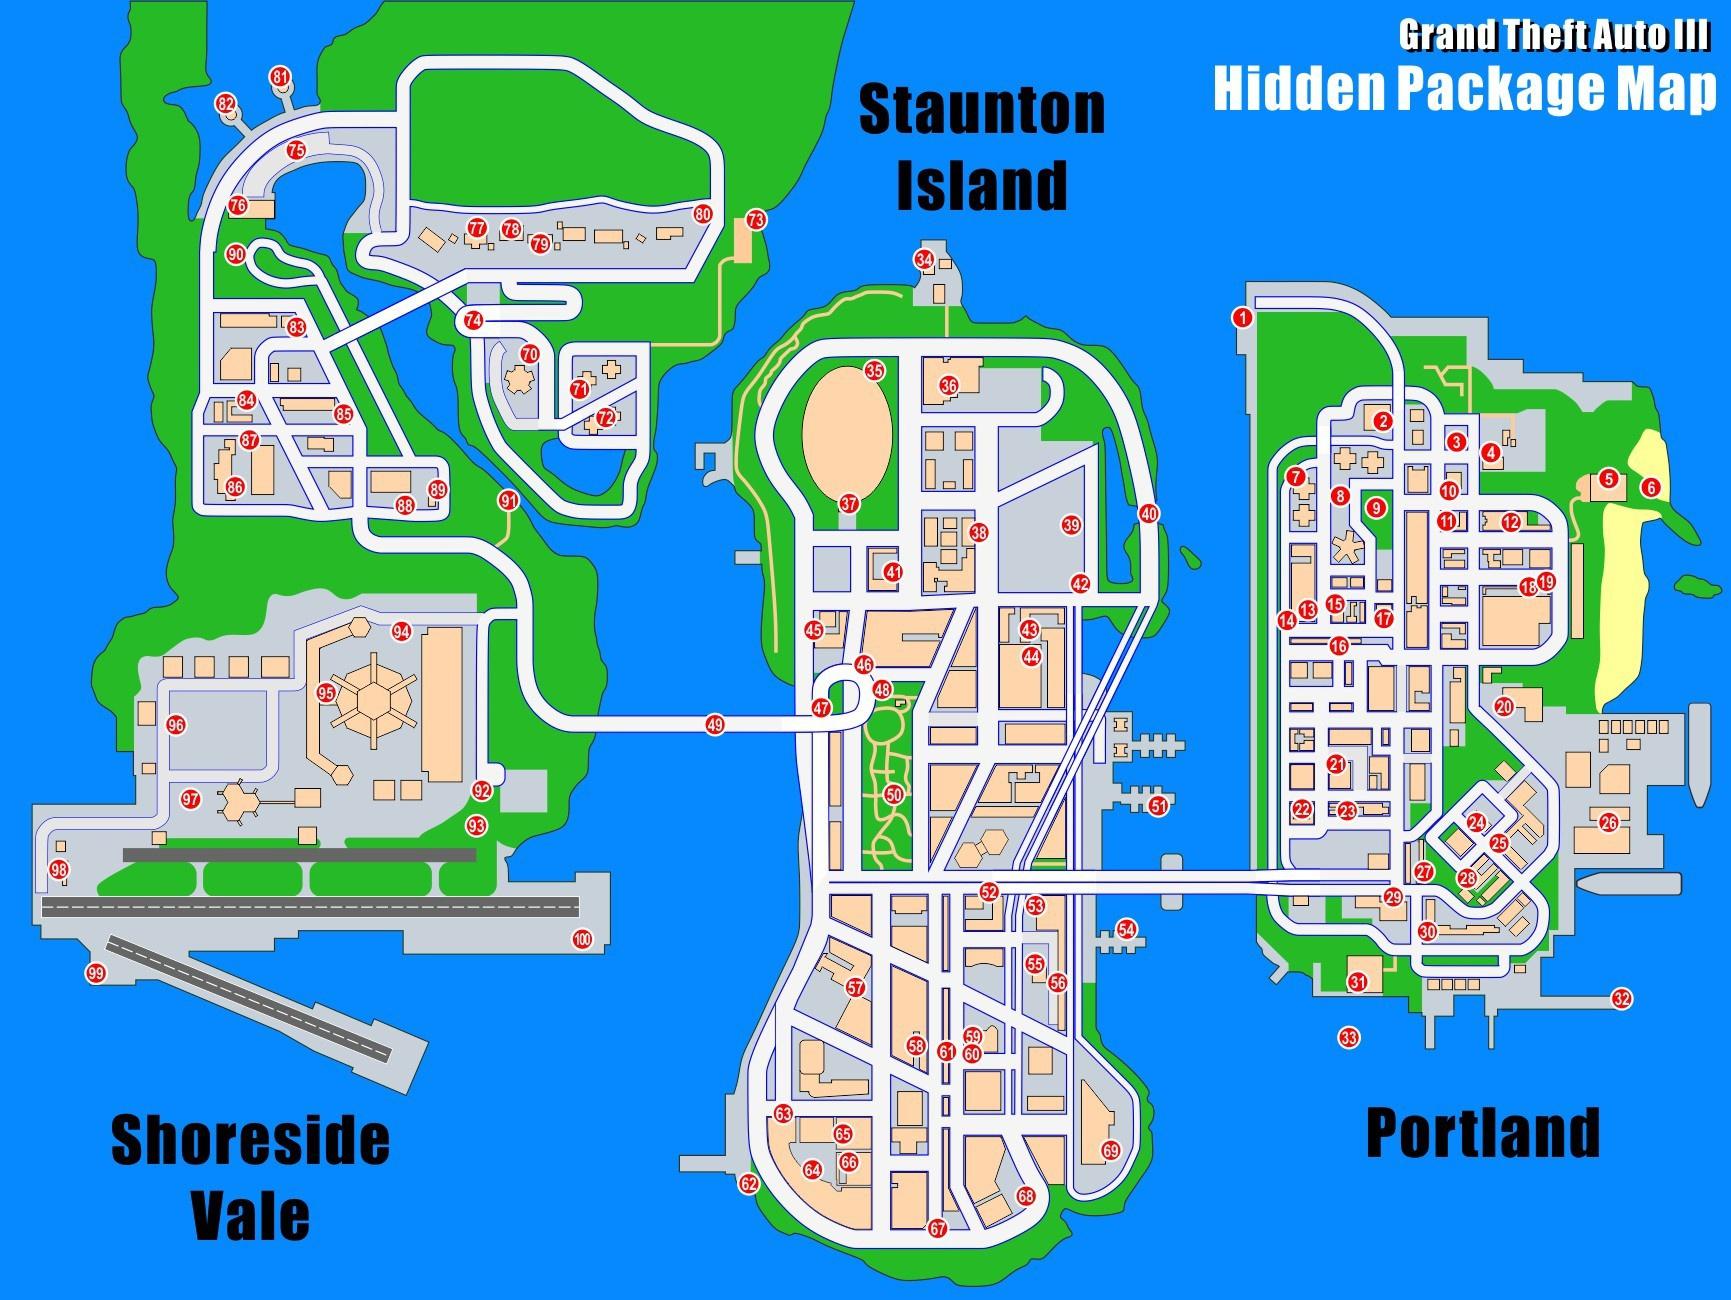 GTA III 100% Completion - Hidden Packages Map